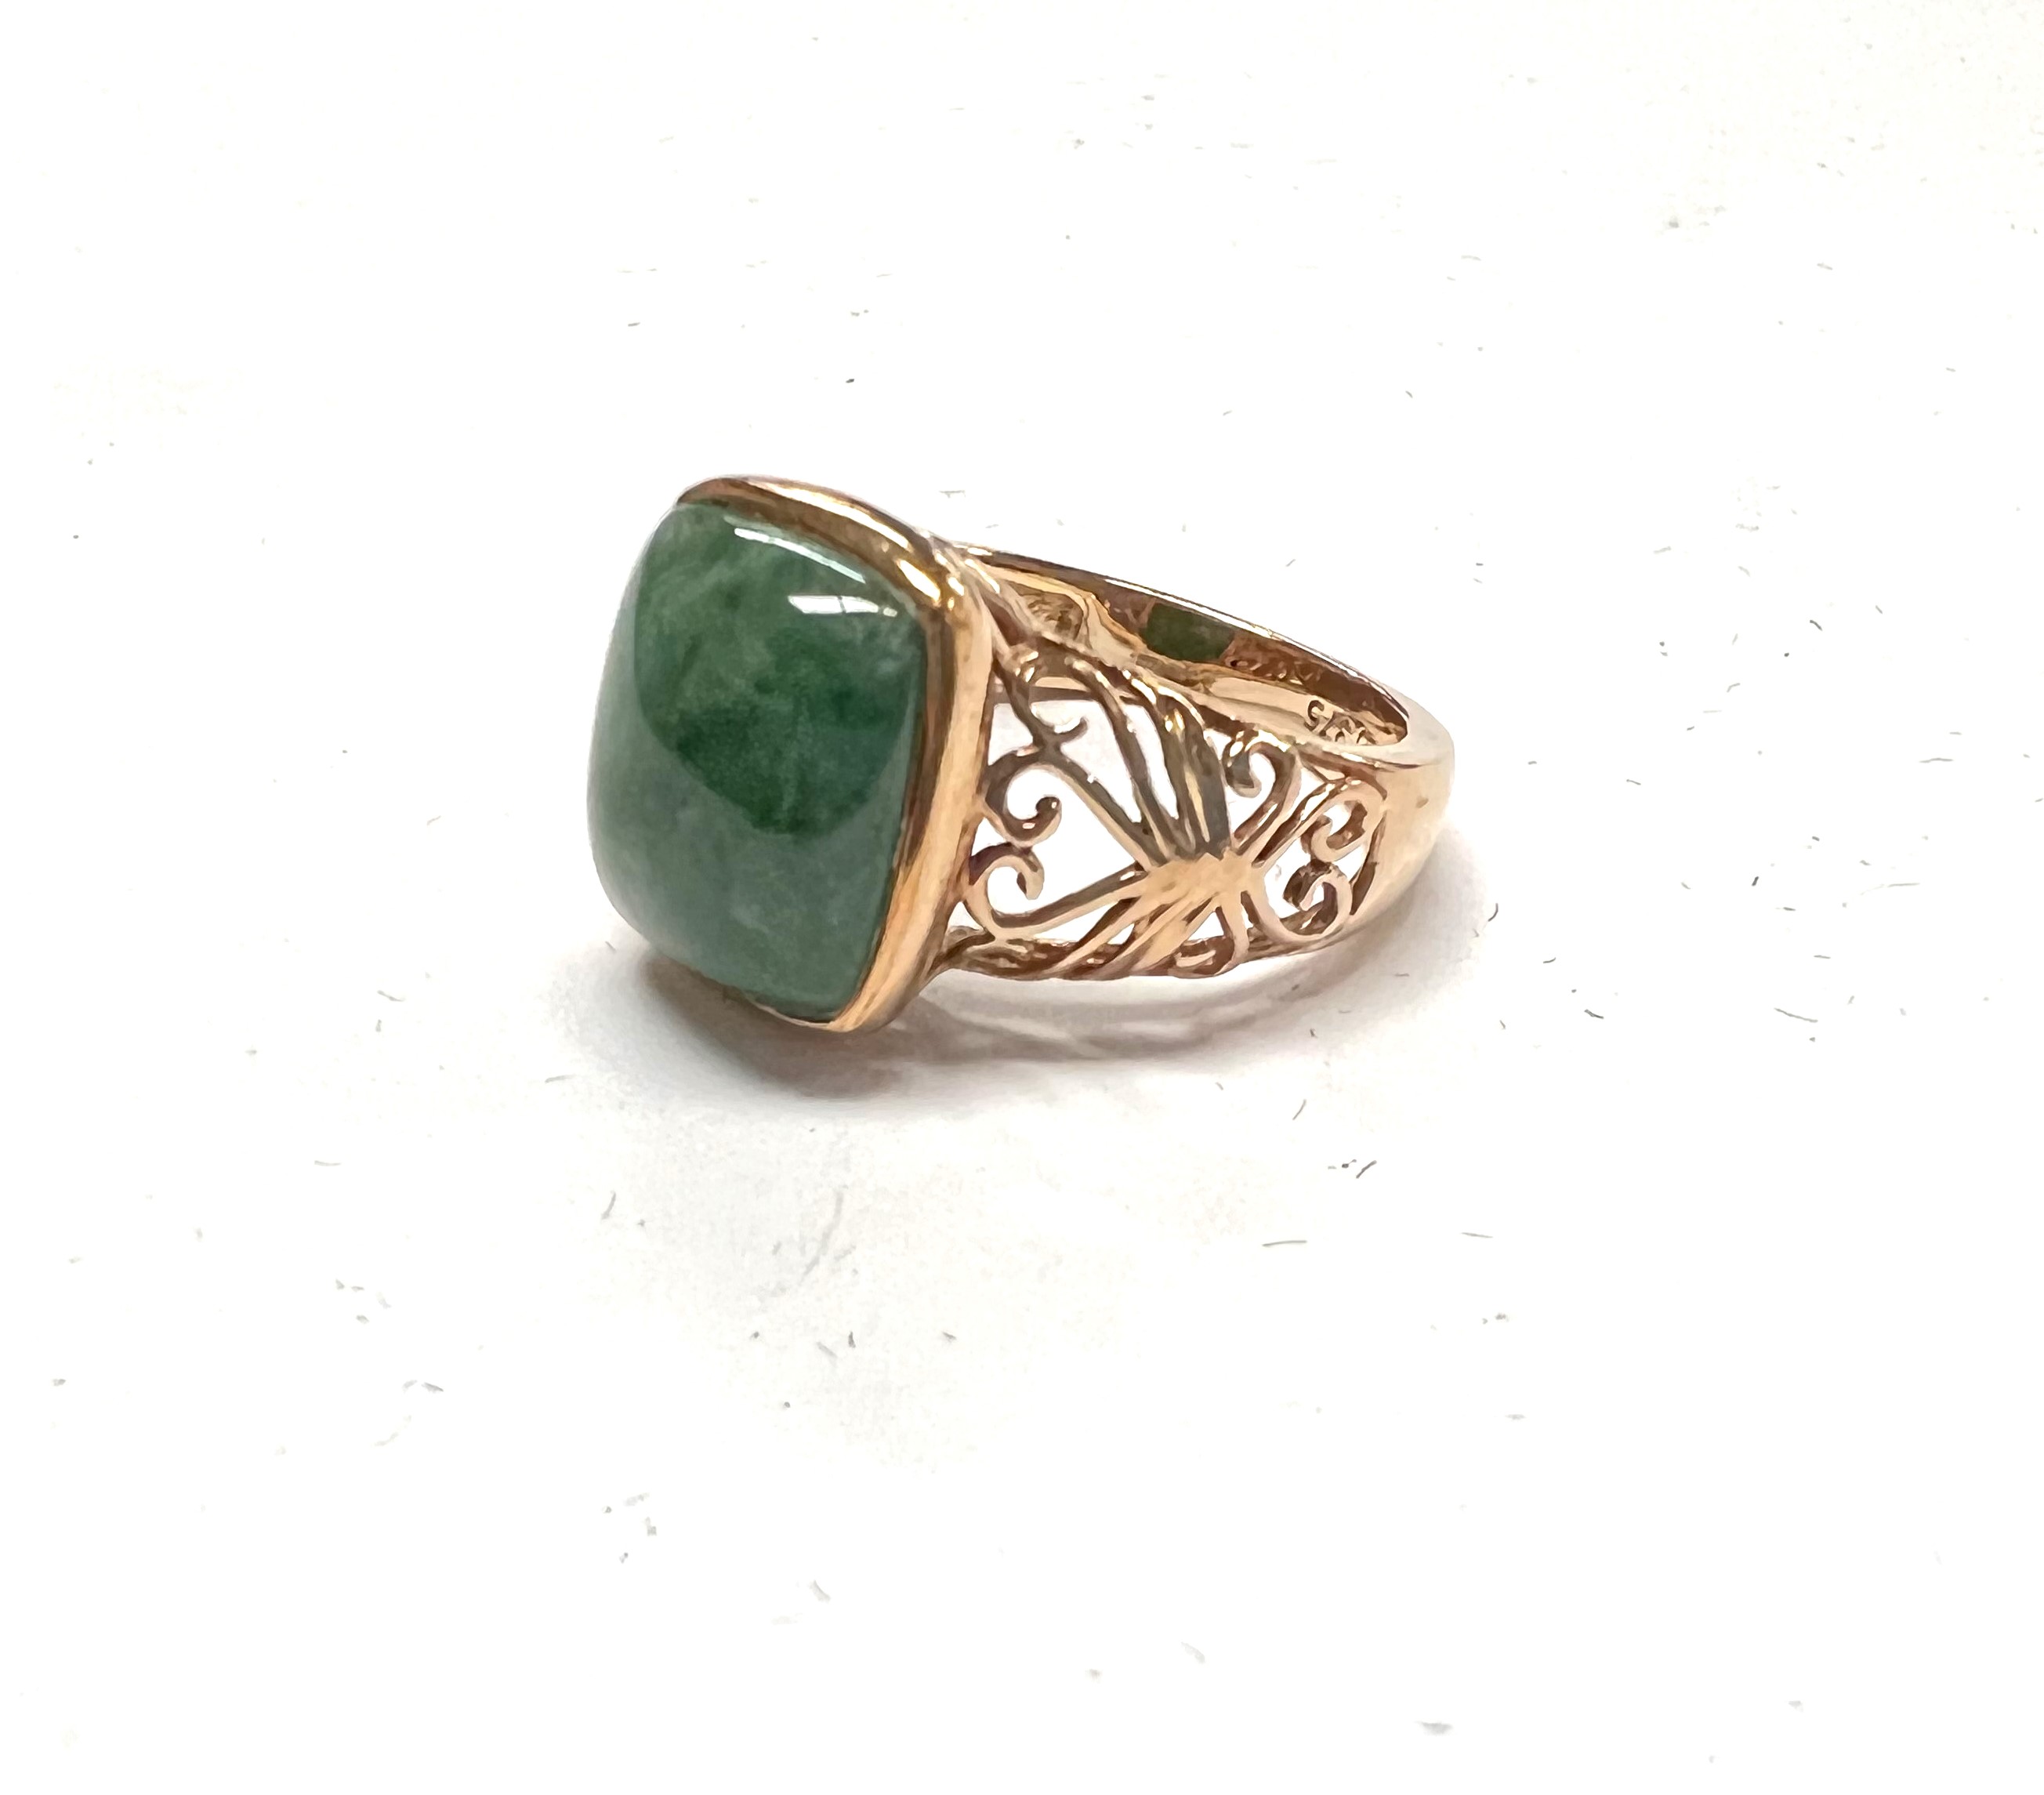 A 9 carat hallmarked gold dress ring set with a square domed jade coloured stone with pierced scroll